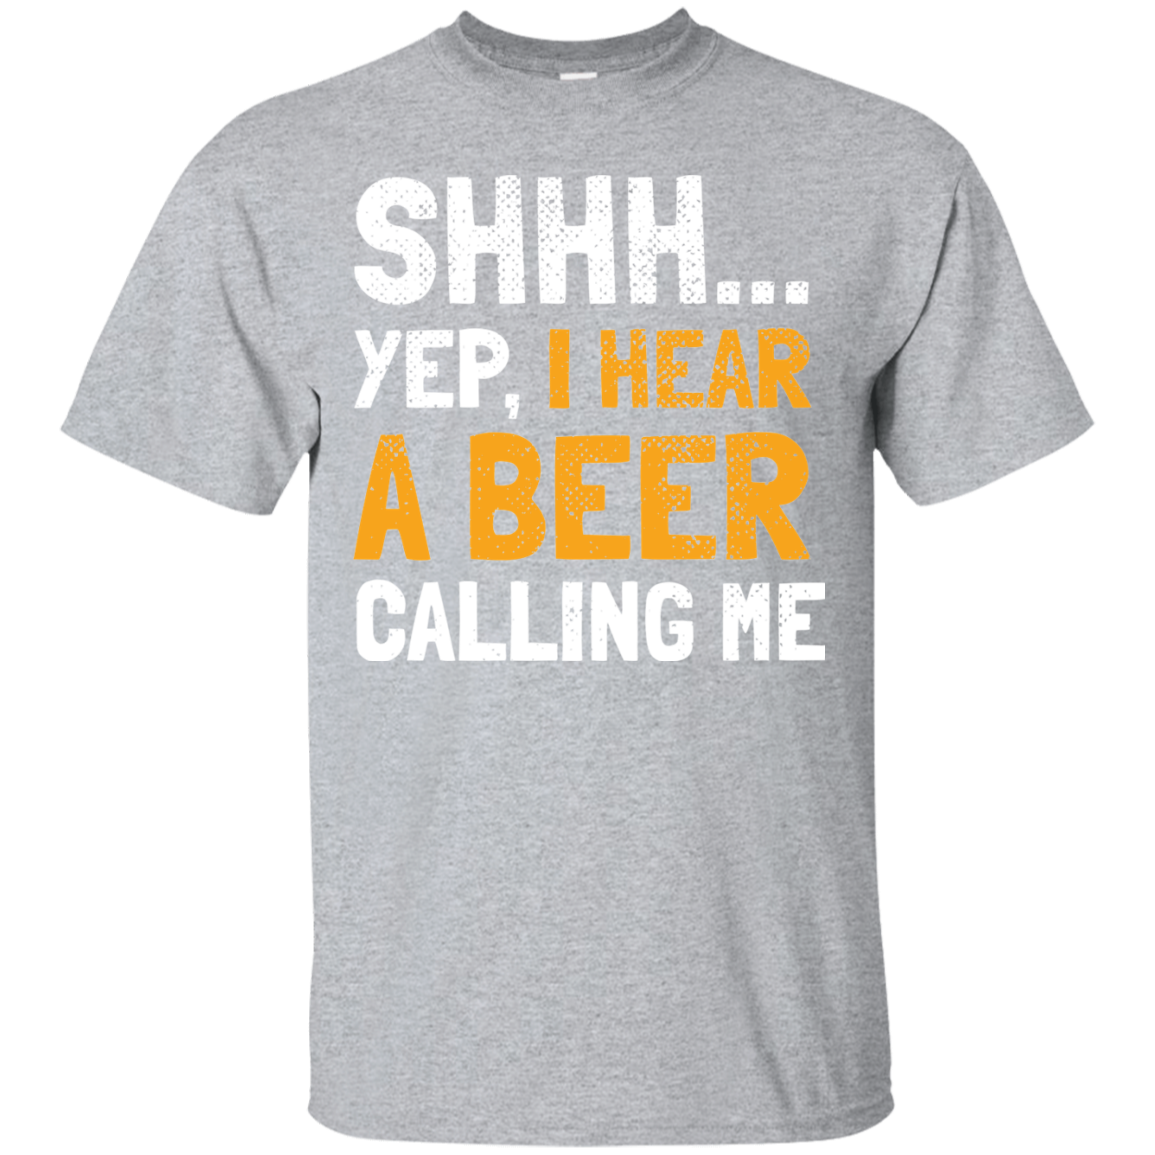 Shhh. I Hear Beer Calling Me T-Shirt Apparel - The Beer Lodge